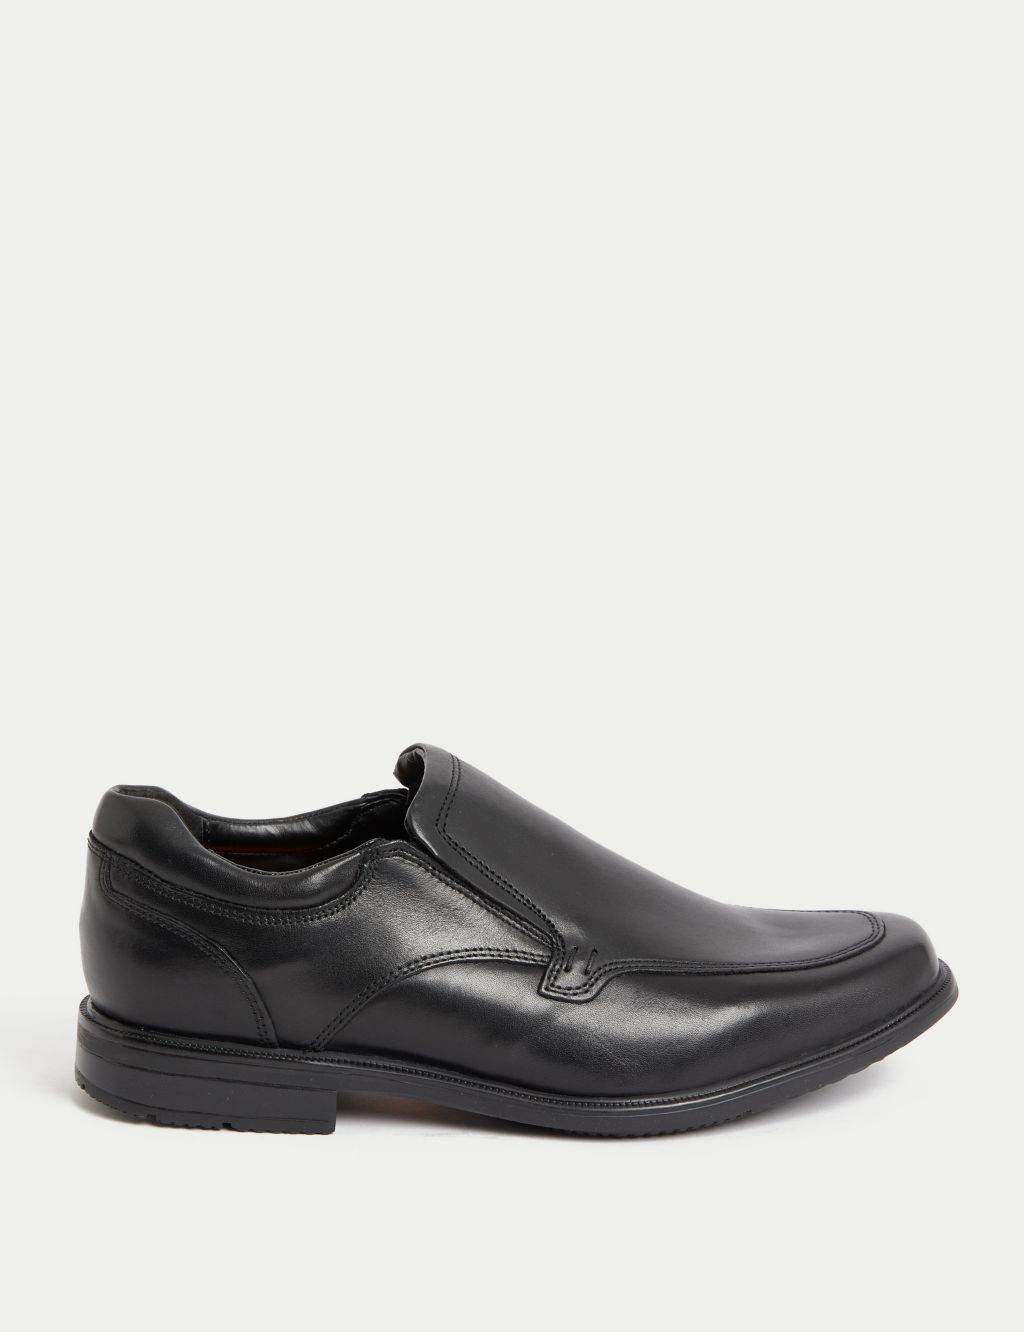 Men's Lace Up Shoe with Rubber Heel in Black, Hawes & Curtis